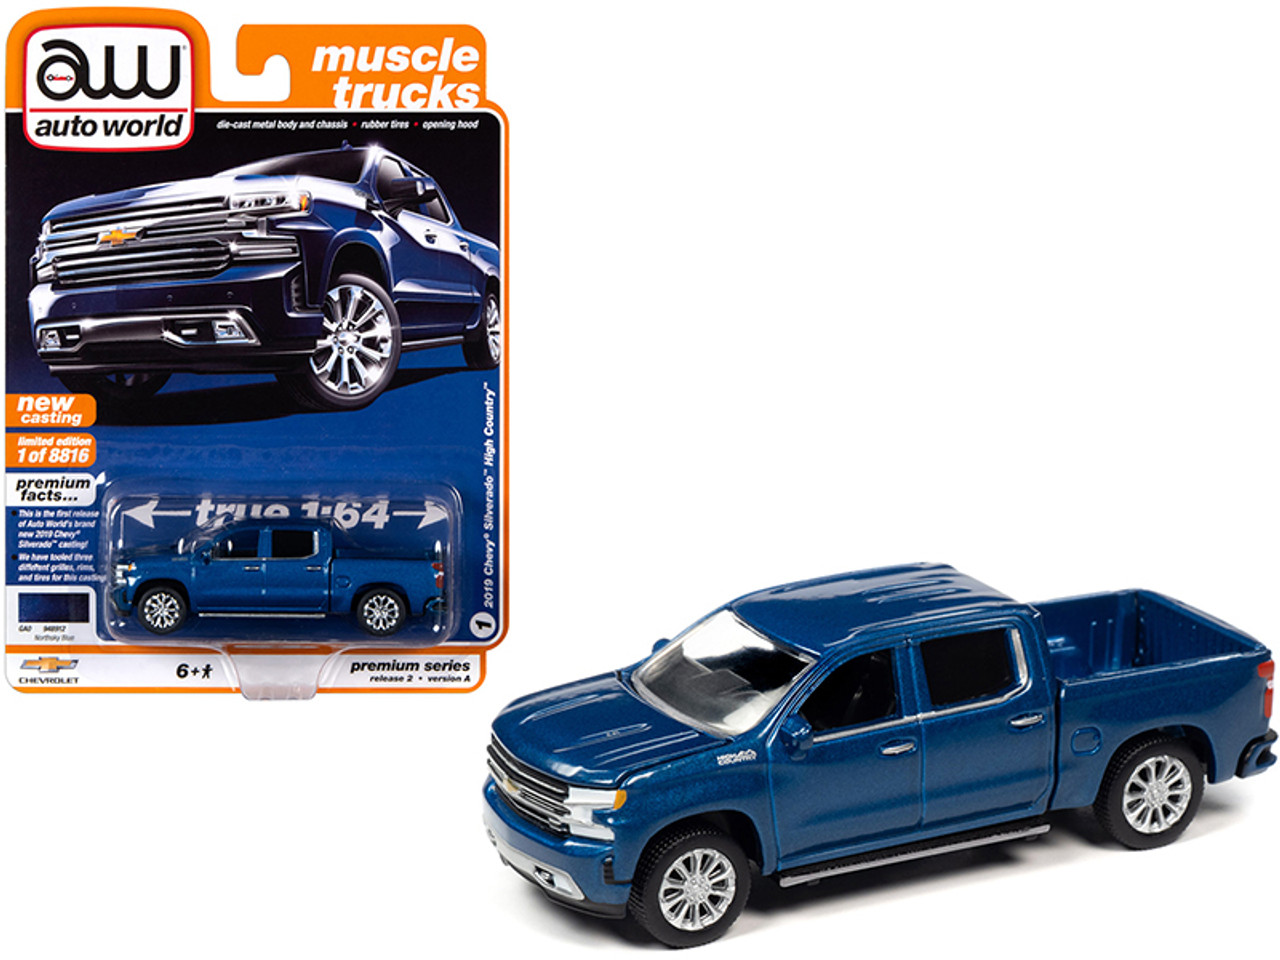 2019 Chevrolet Silverado High Country Pickup Truck Northsky Blue Metallic "Muscle Trucks" Limited Edition to 8,816 pieces Worldwide 1/64 Diecast Model Car by Autoworld